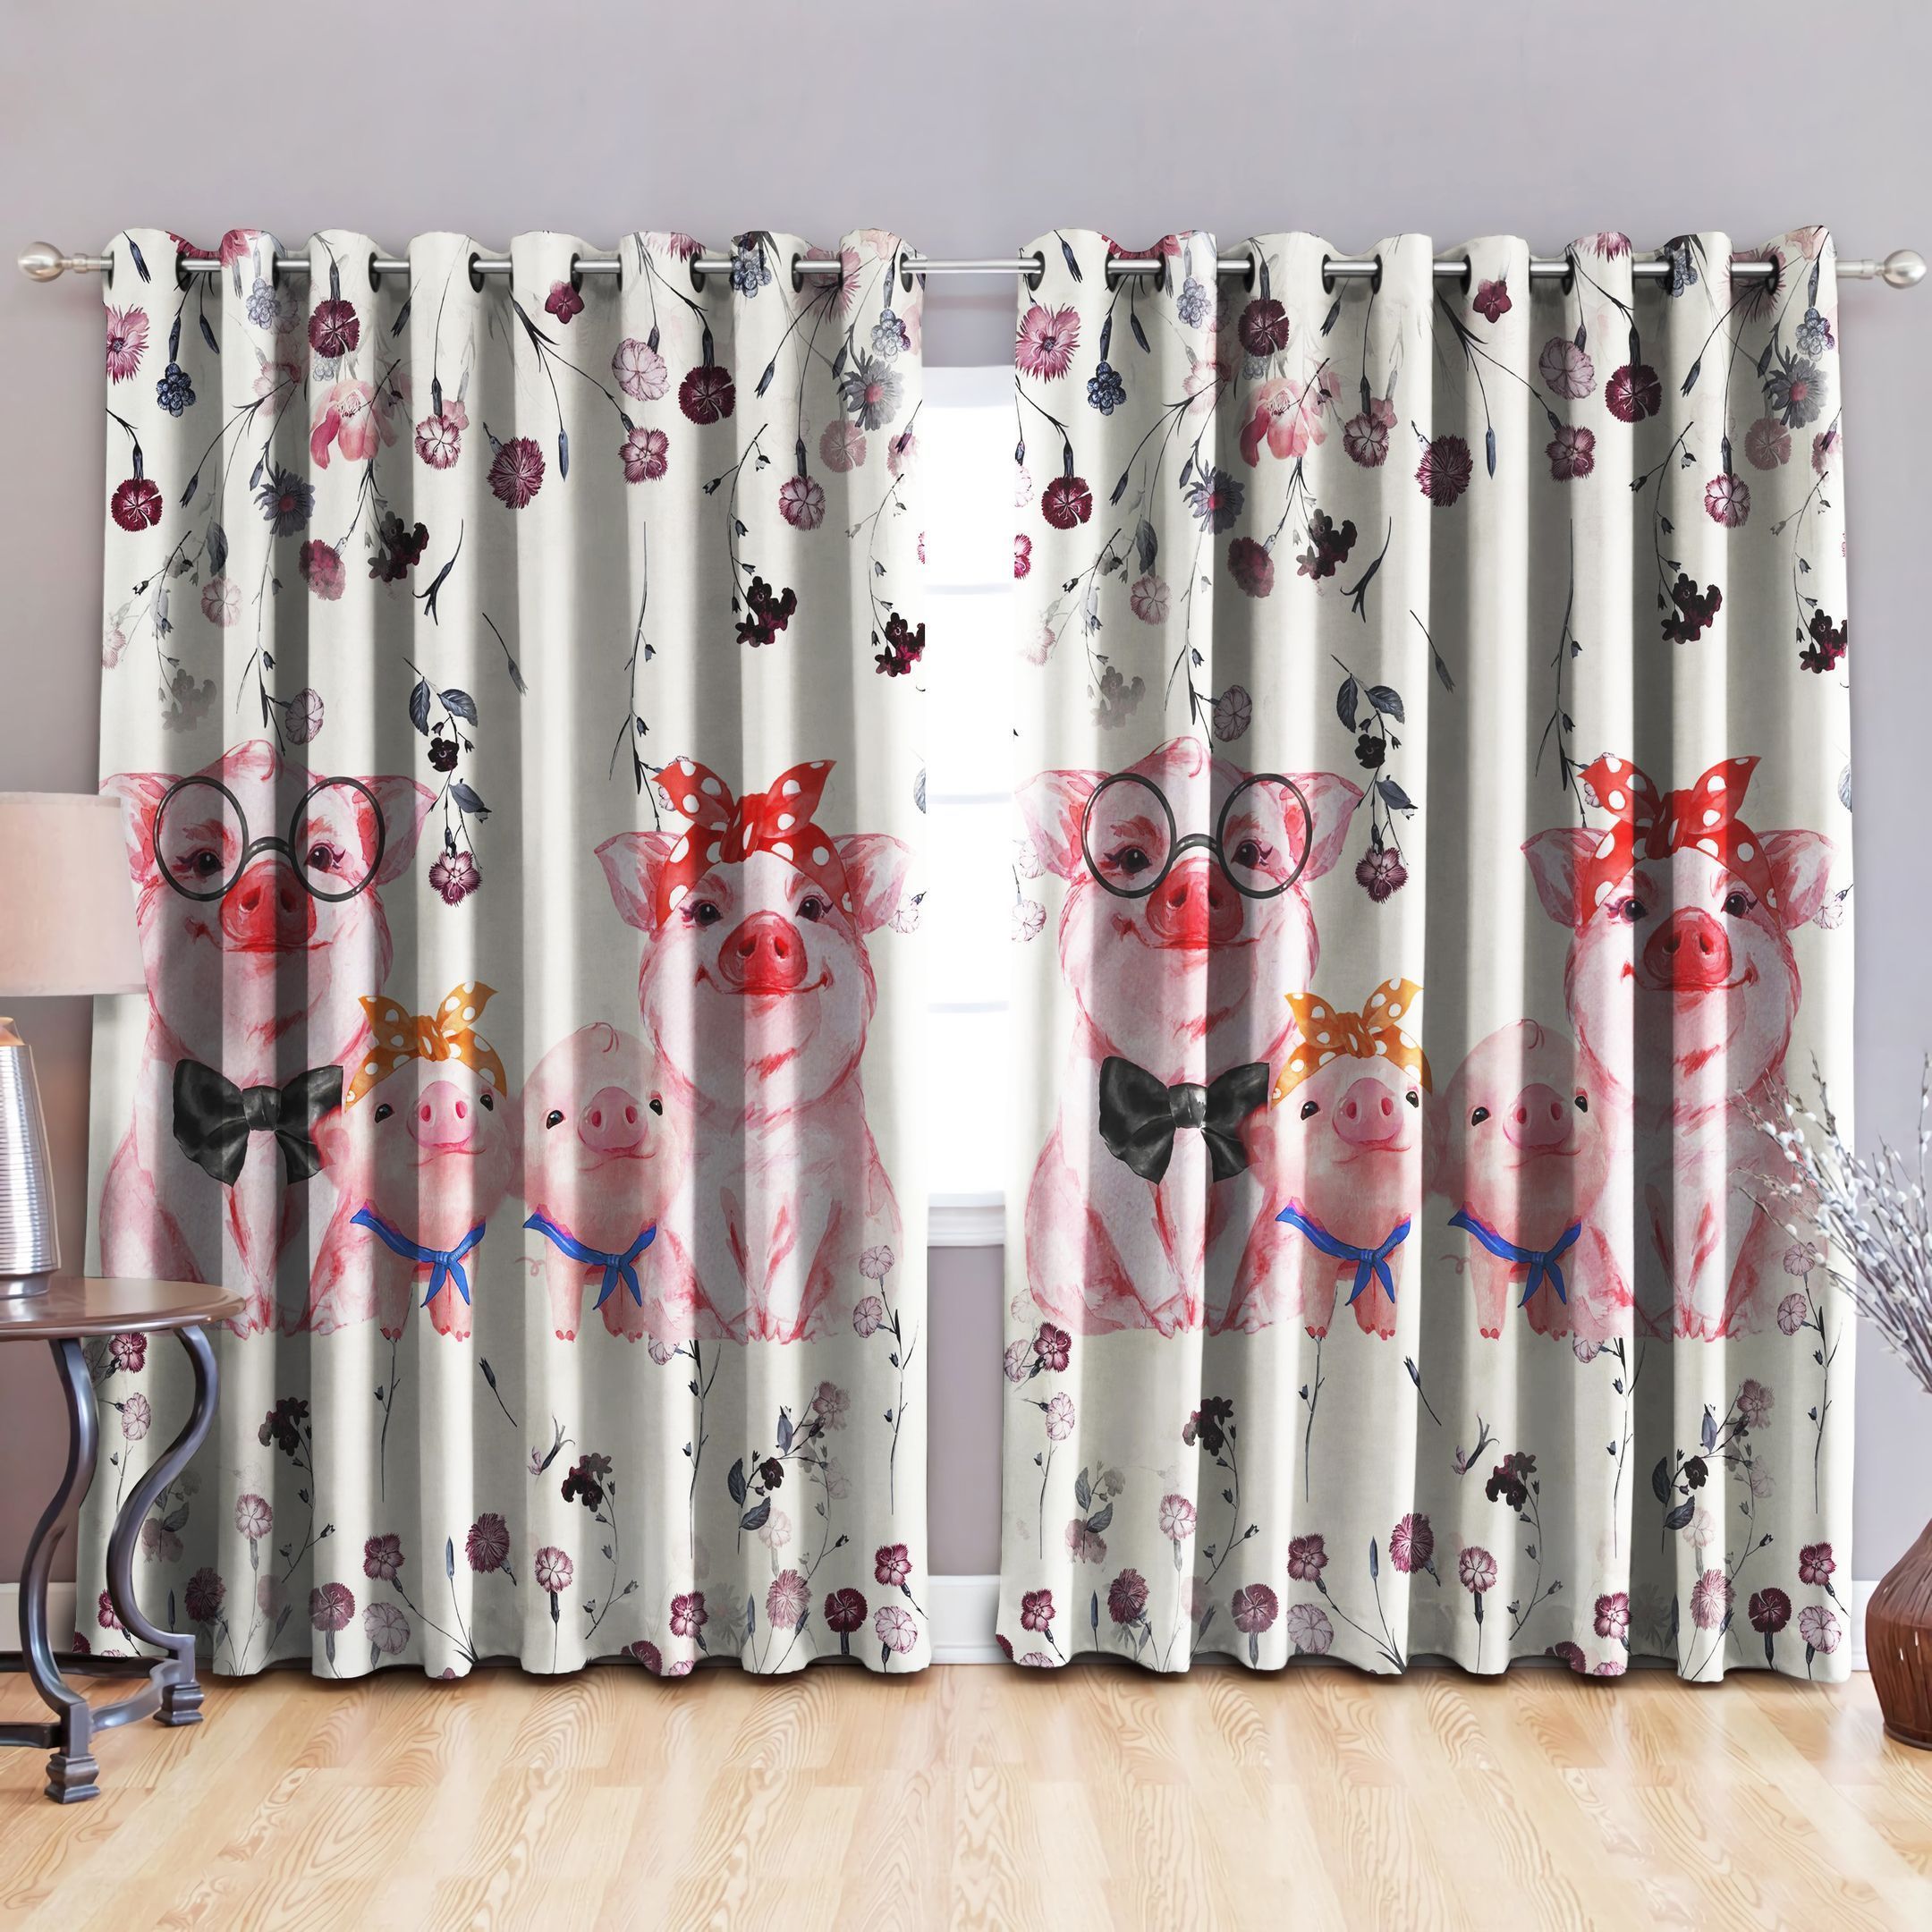 pig family floral printed window curtain home decor 8047